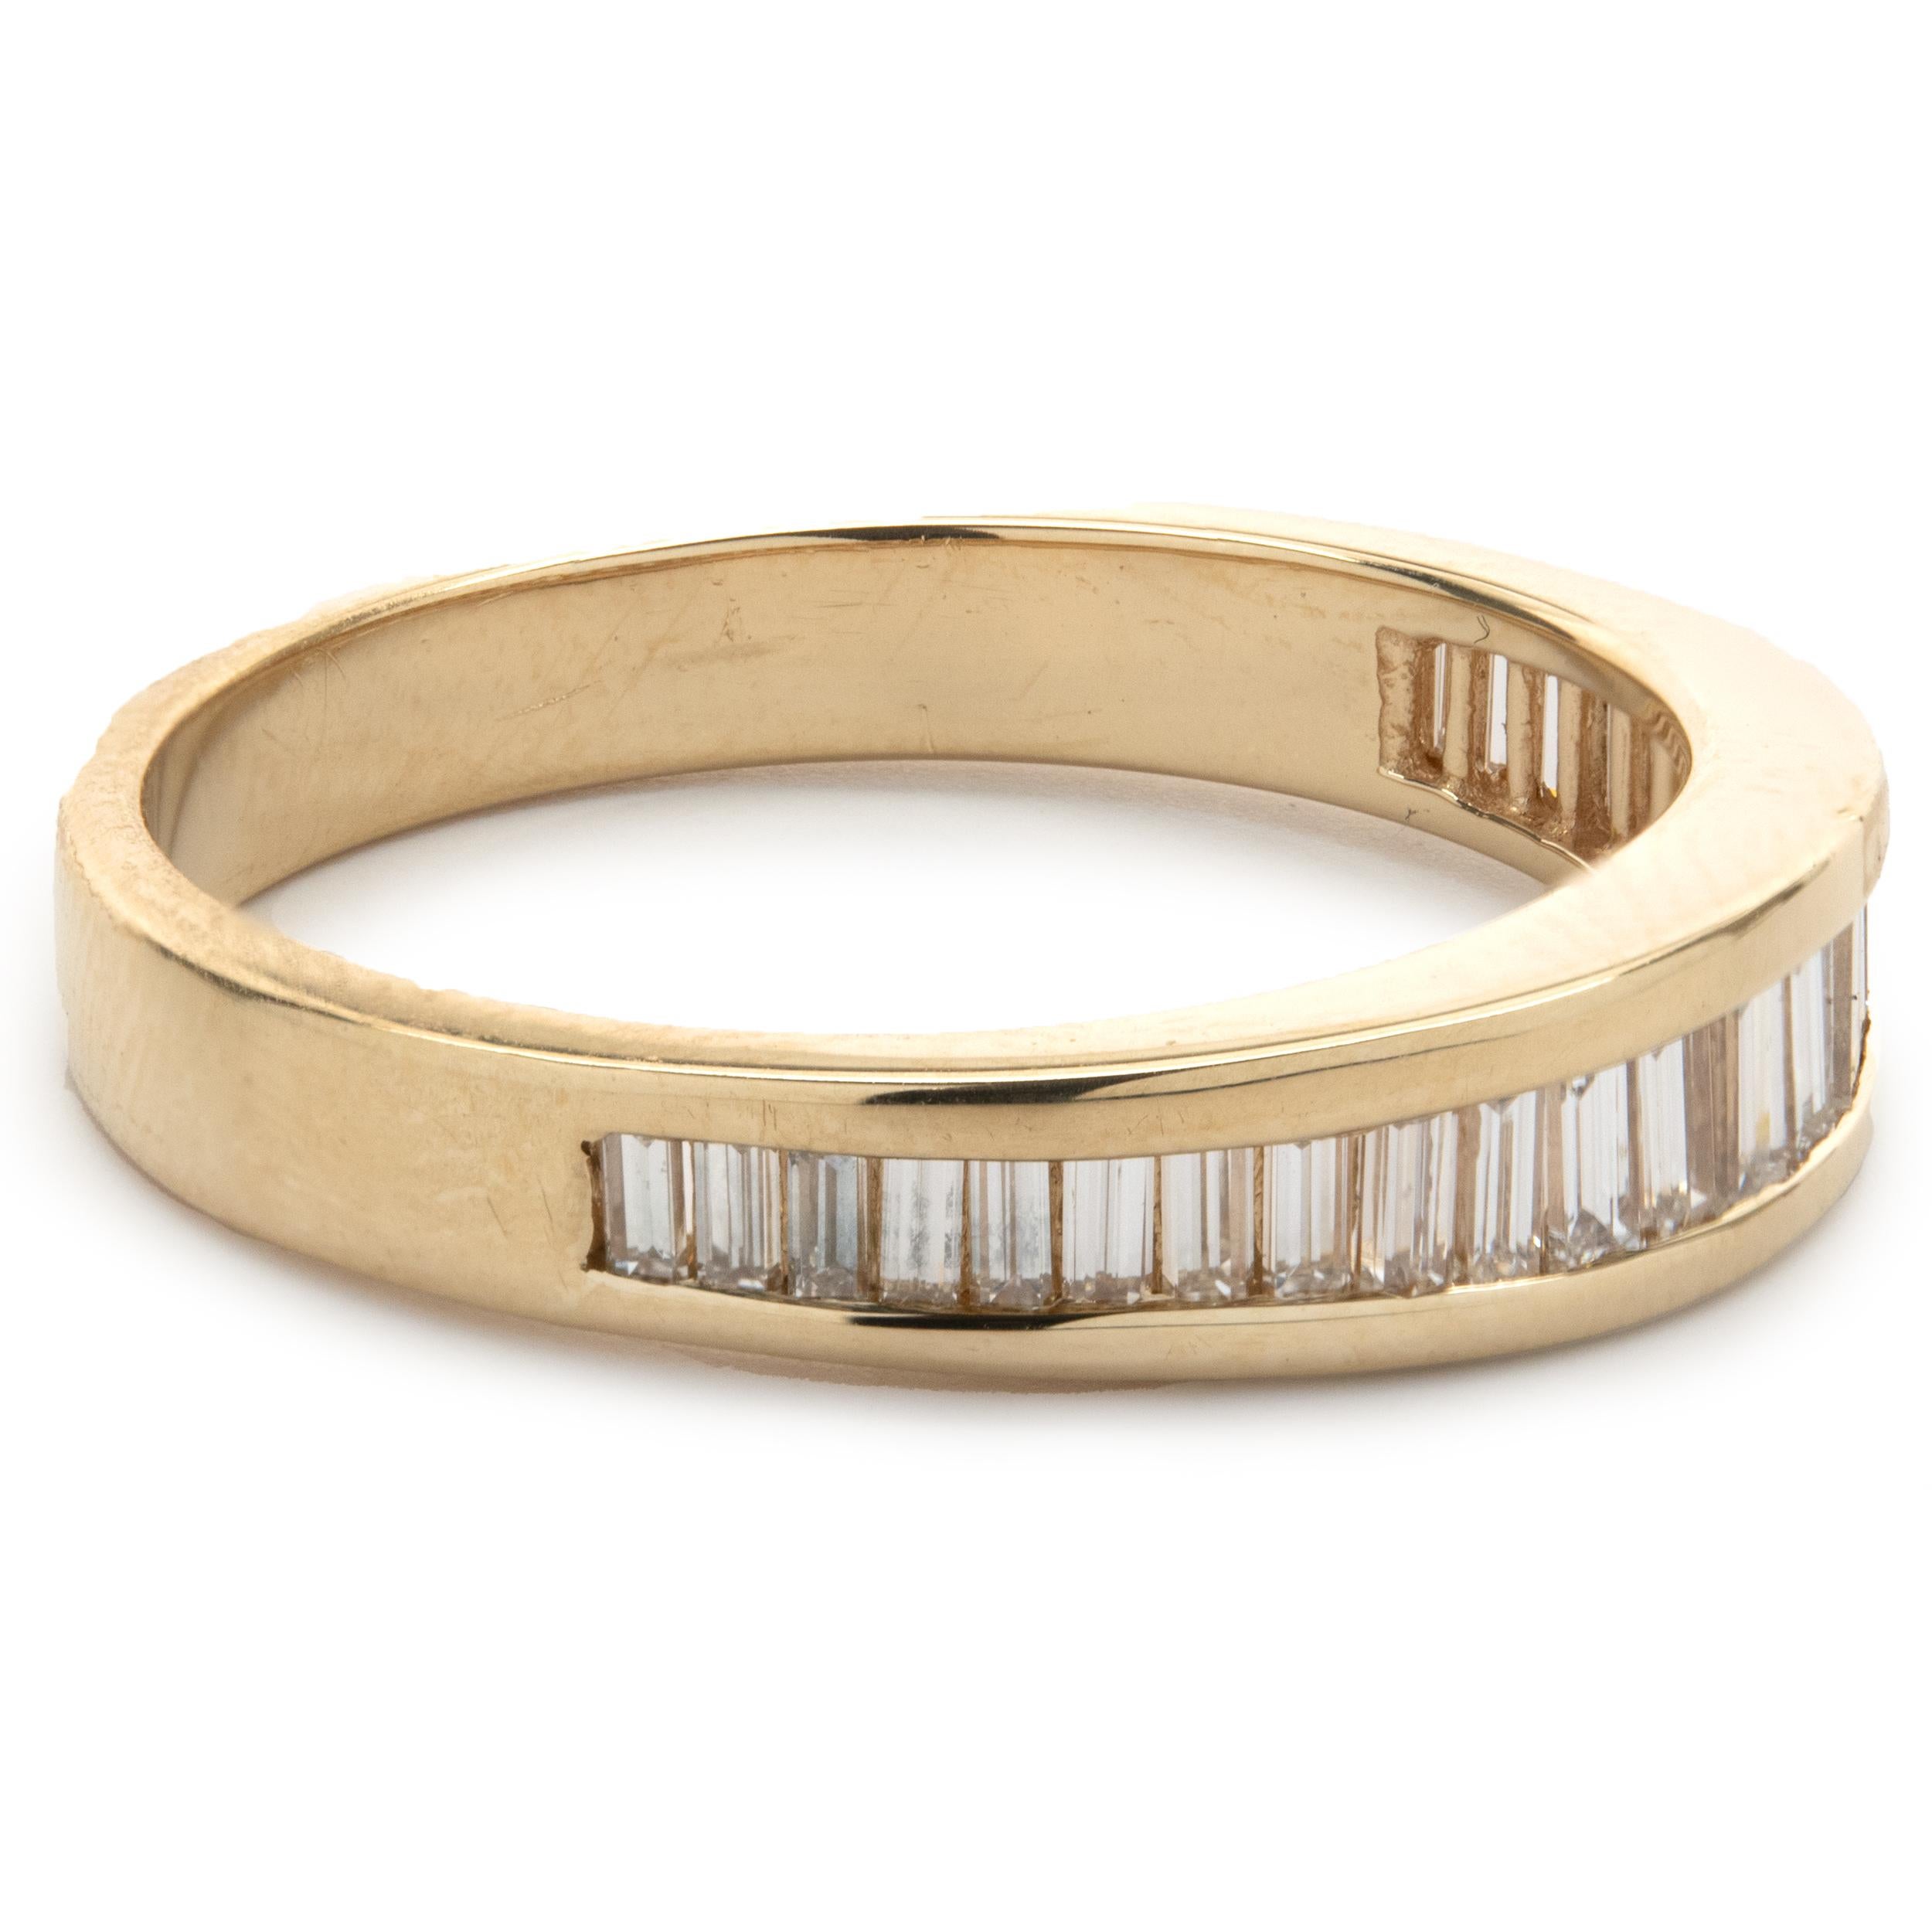 Designer: custom
Material: 14K yellow gold
Diamond: 26 baguette cut = 0.78cttw
Color: G 
Clarity: SI1
Ring size: 10.5 (please allow two additional shipping days for sizing requests)
Weight: 4.65 grams
